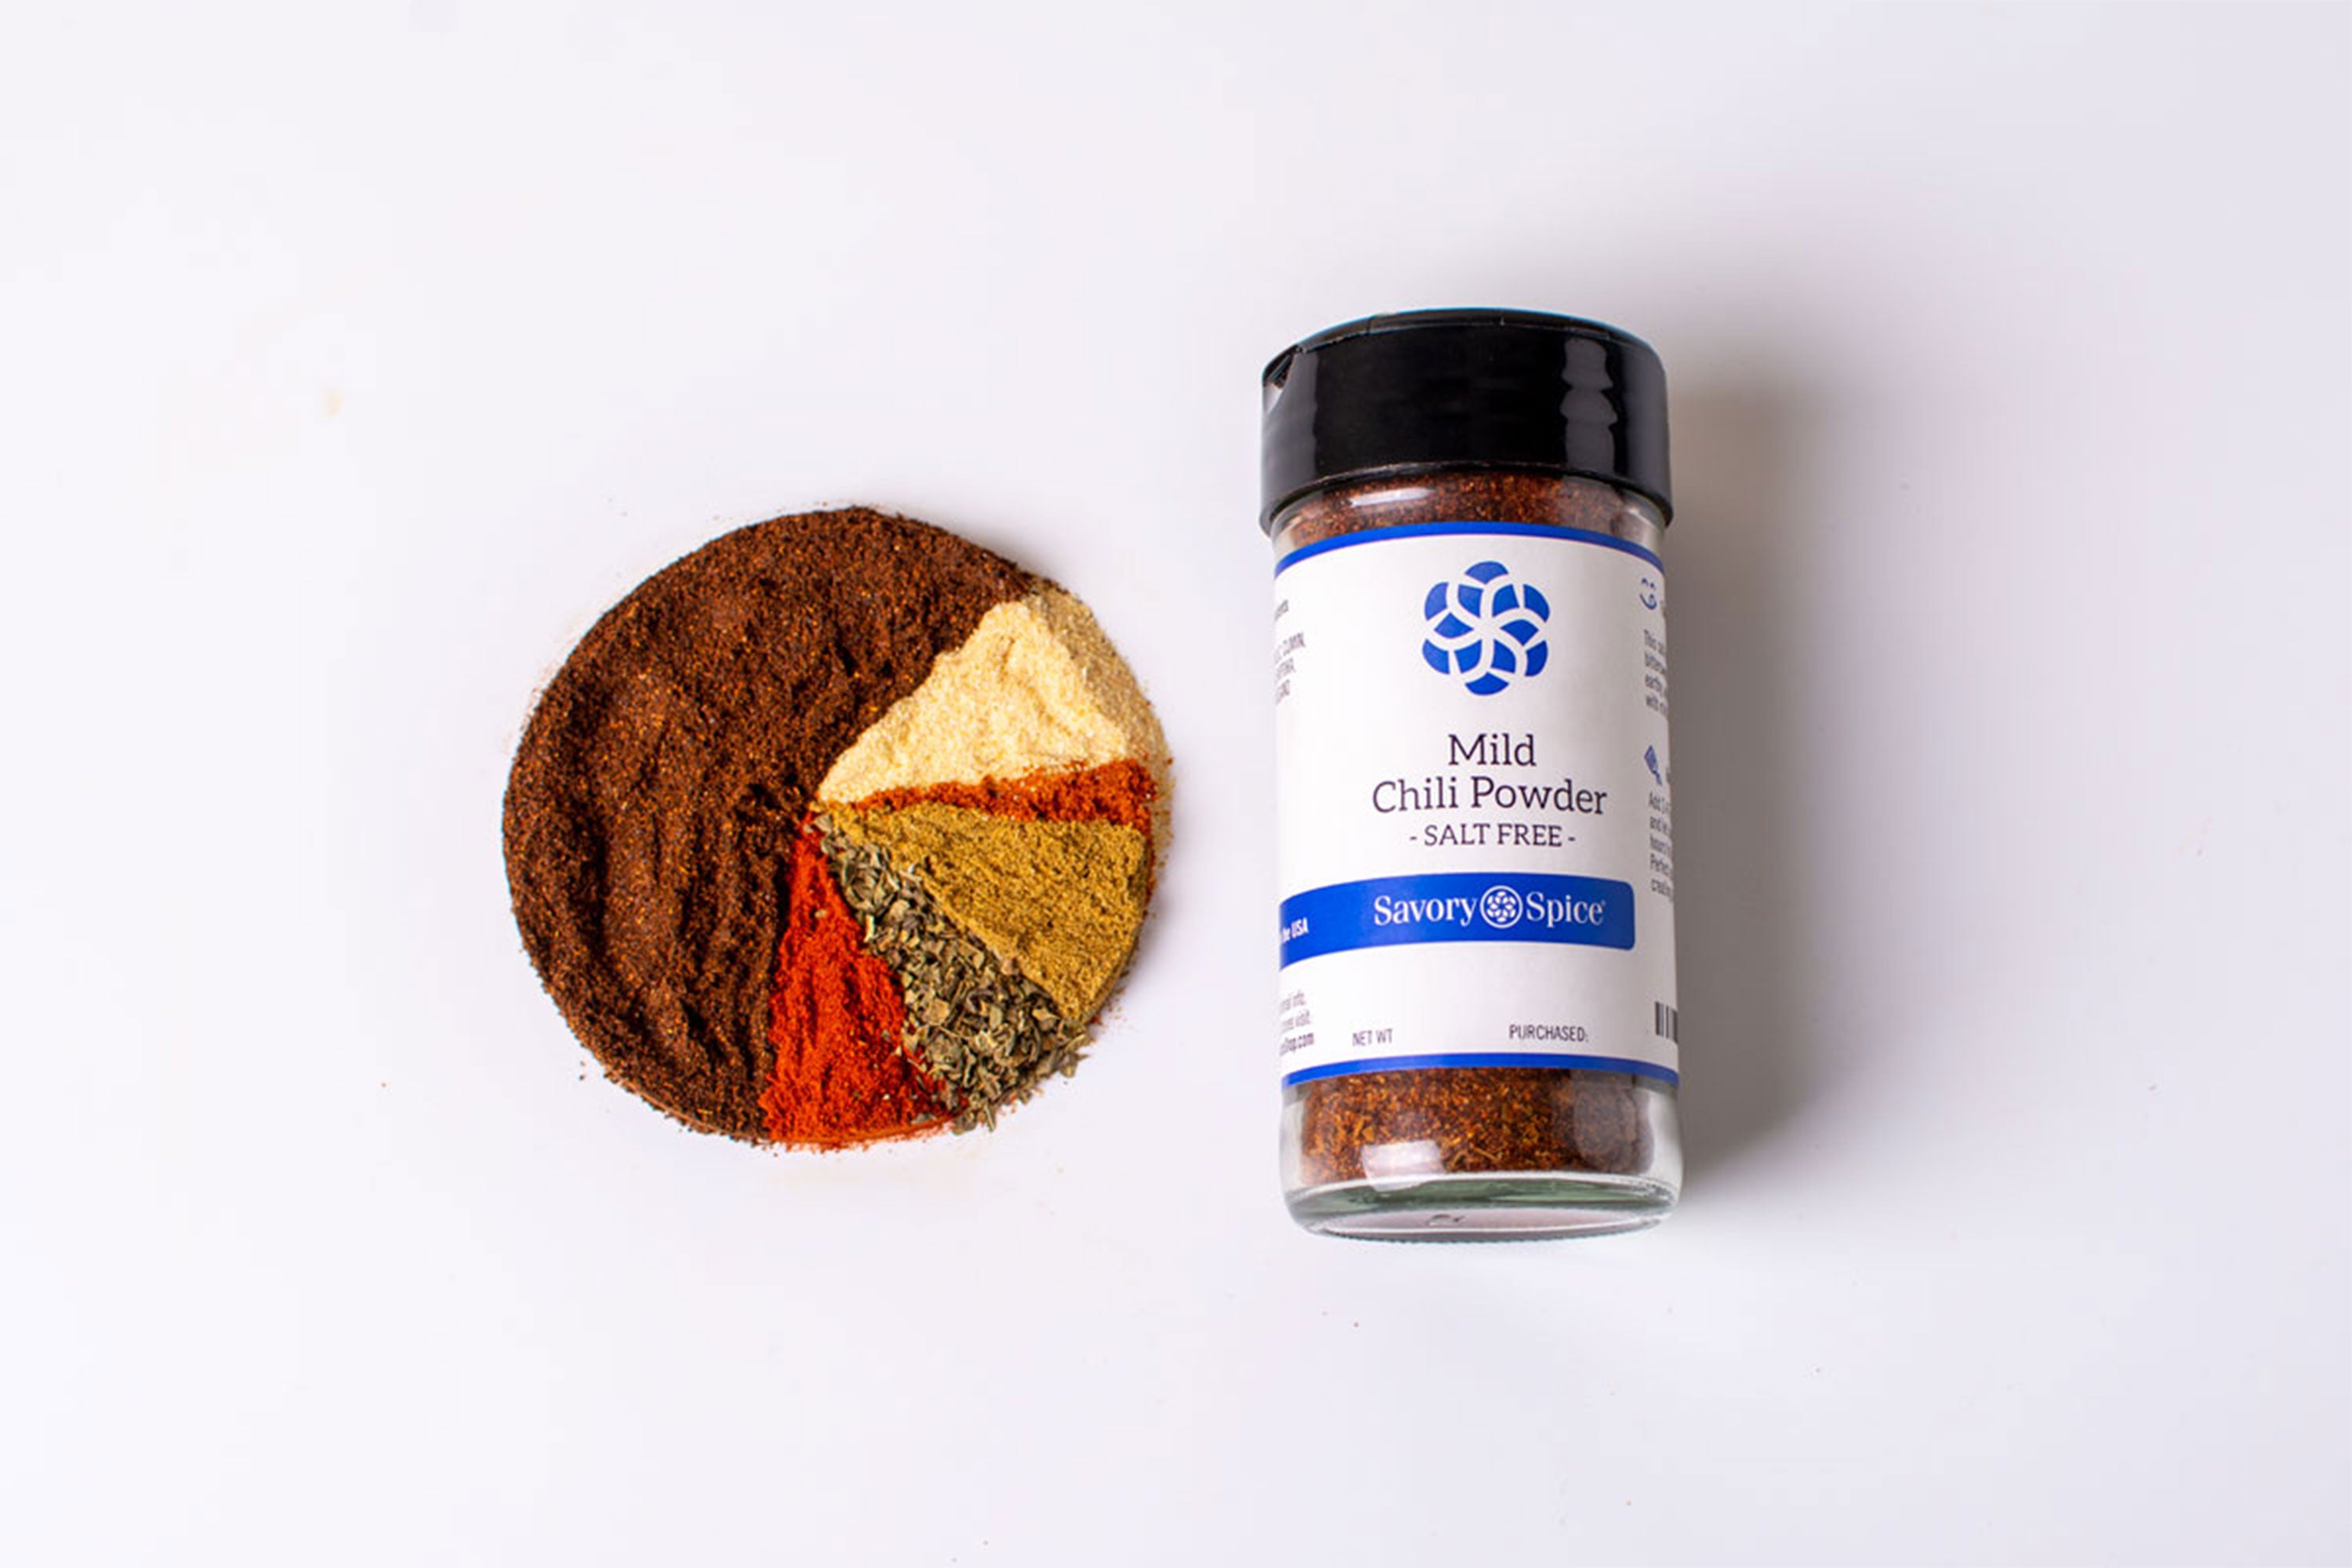 Ingredients in chili powder as a pie chart with jar of Mild Chili Powder